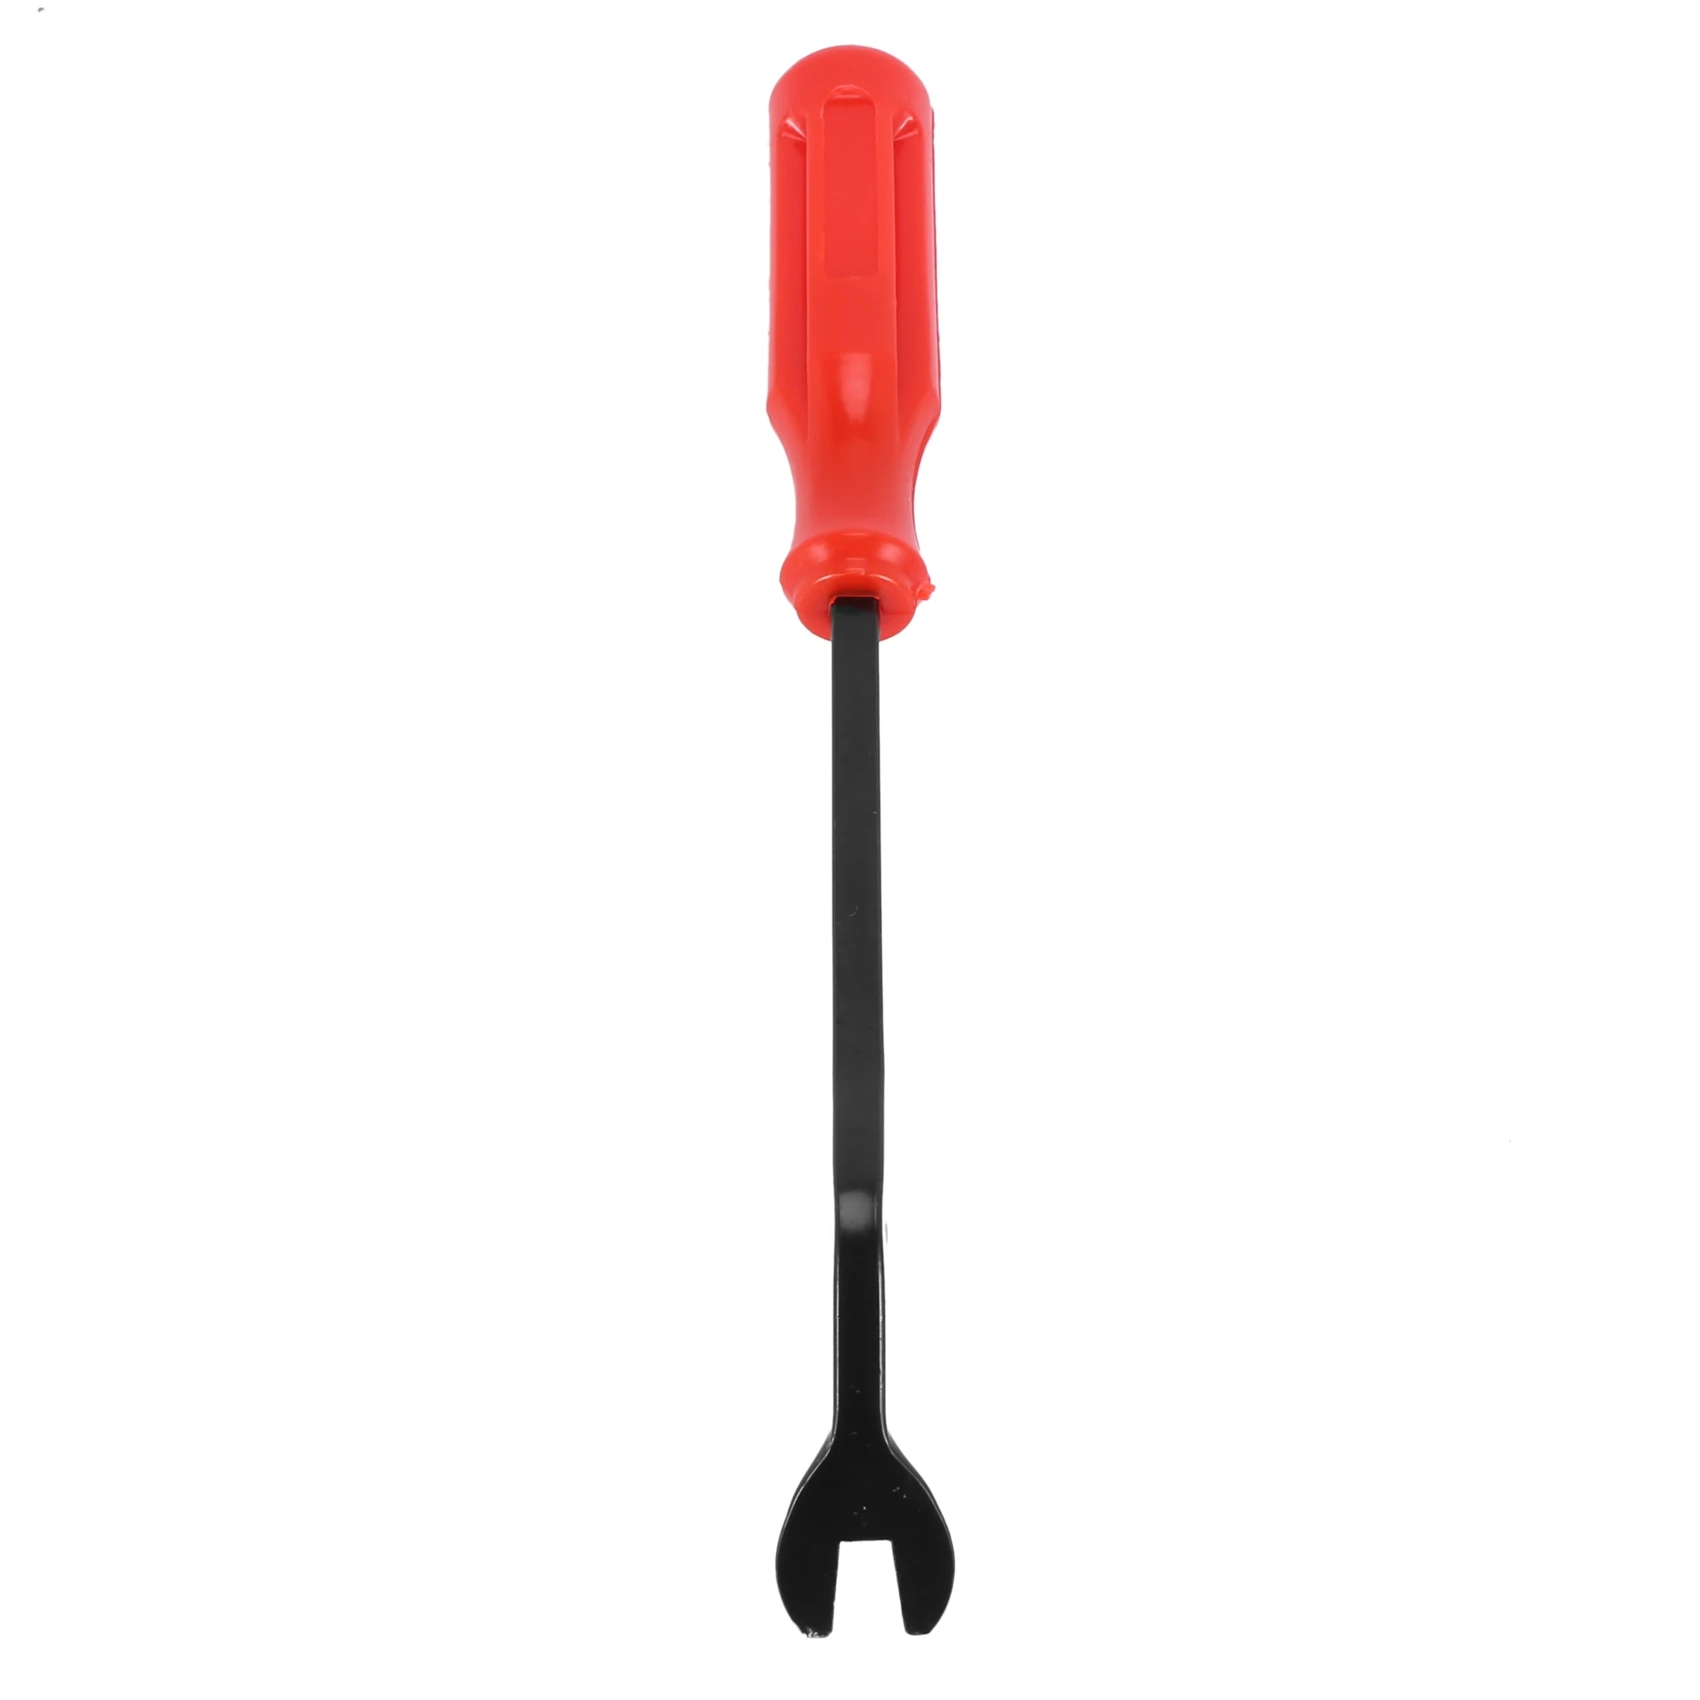 

Car Door Interior Trim Clip Panel Upholstery Fastener Clip Remover Tool Screwdriver Nail Puller 6 Inch Red